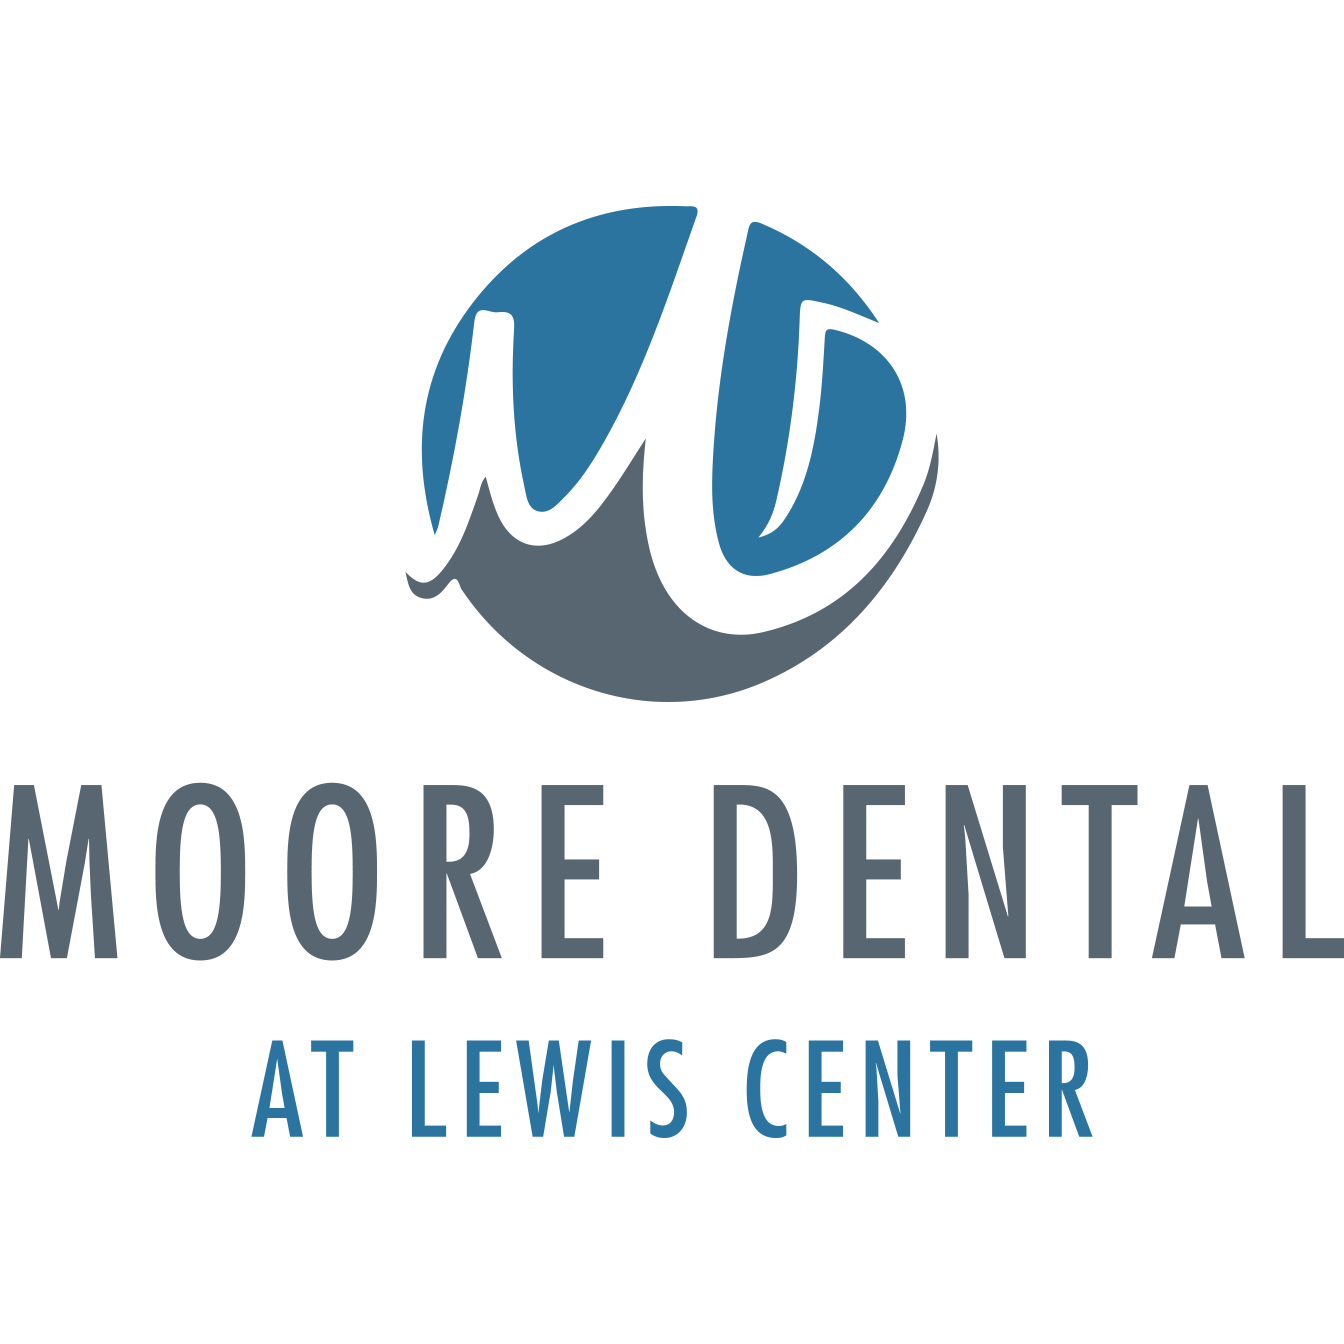 Moore Dental at Lewis Center - Lewis Center, OH 43035 - (740)548-5100 | ShowMeLocal.com